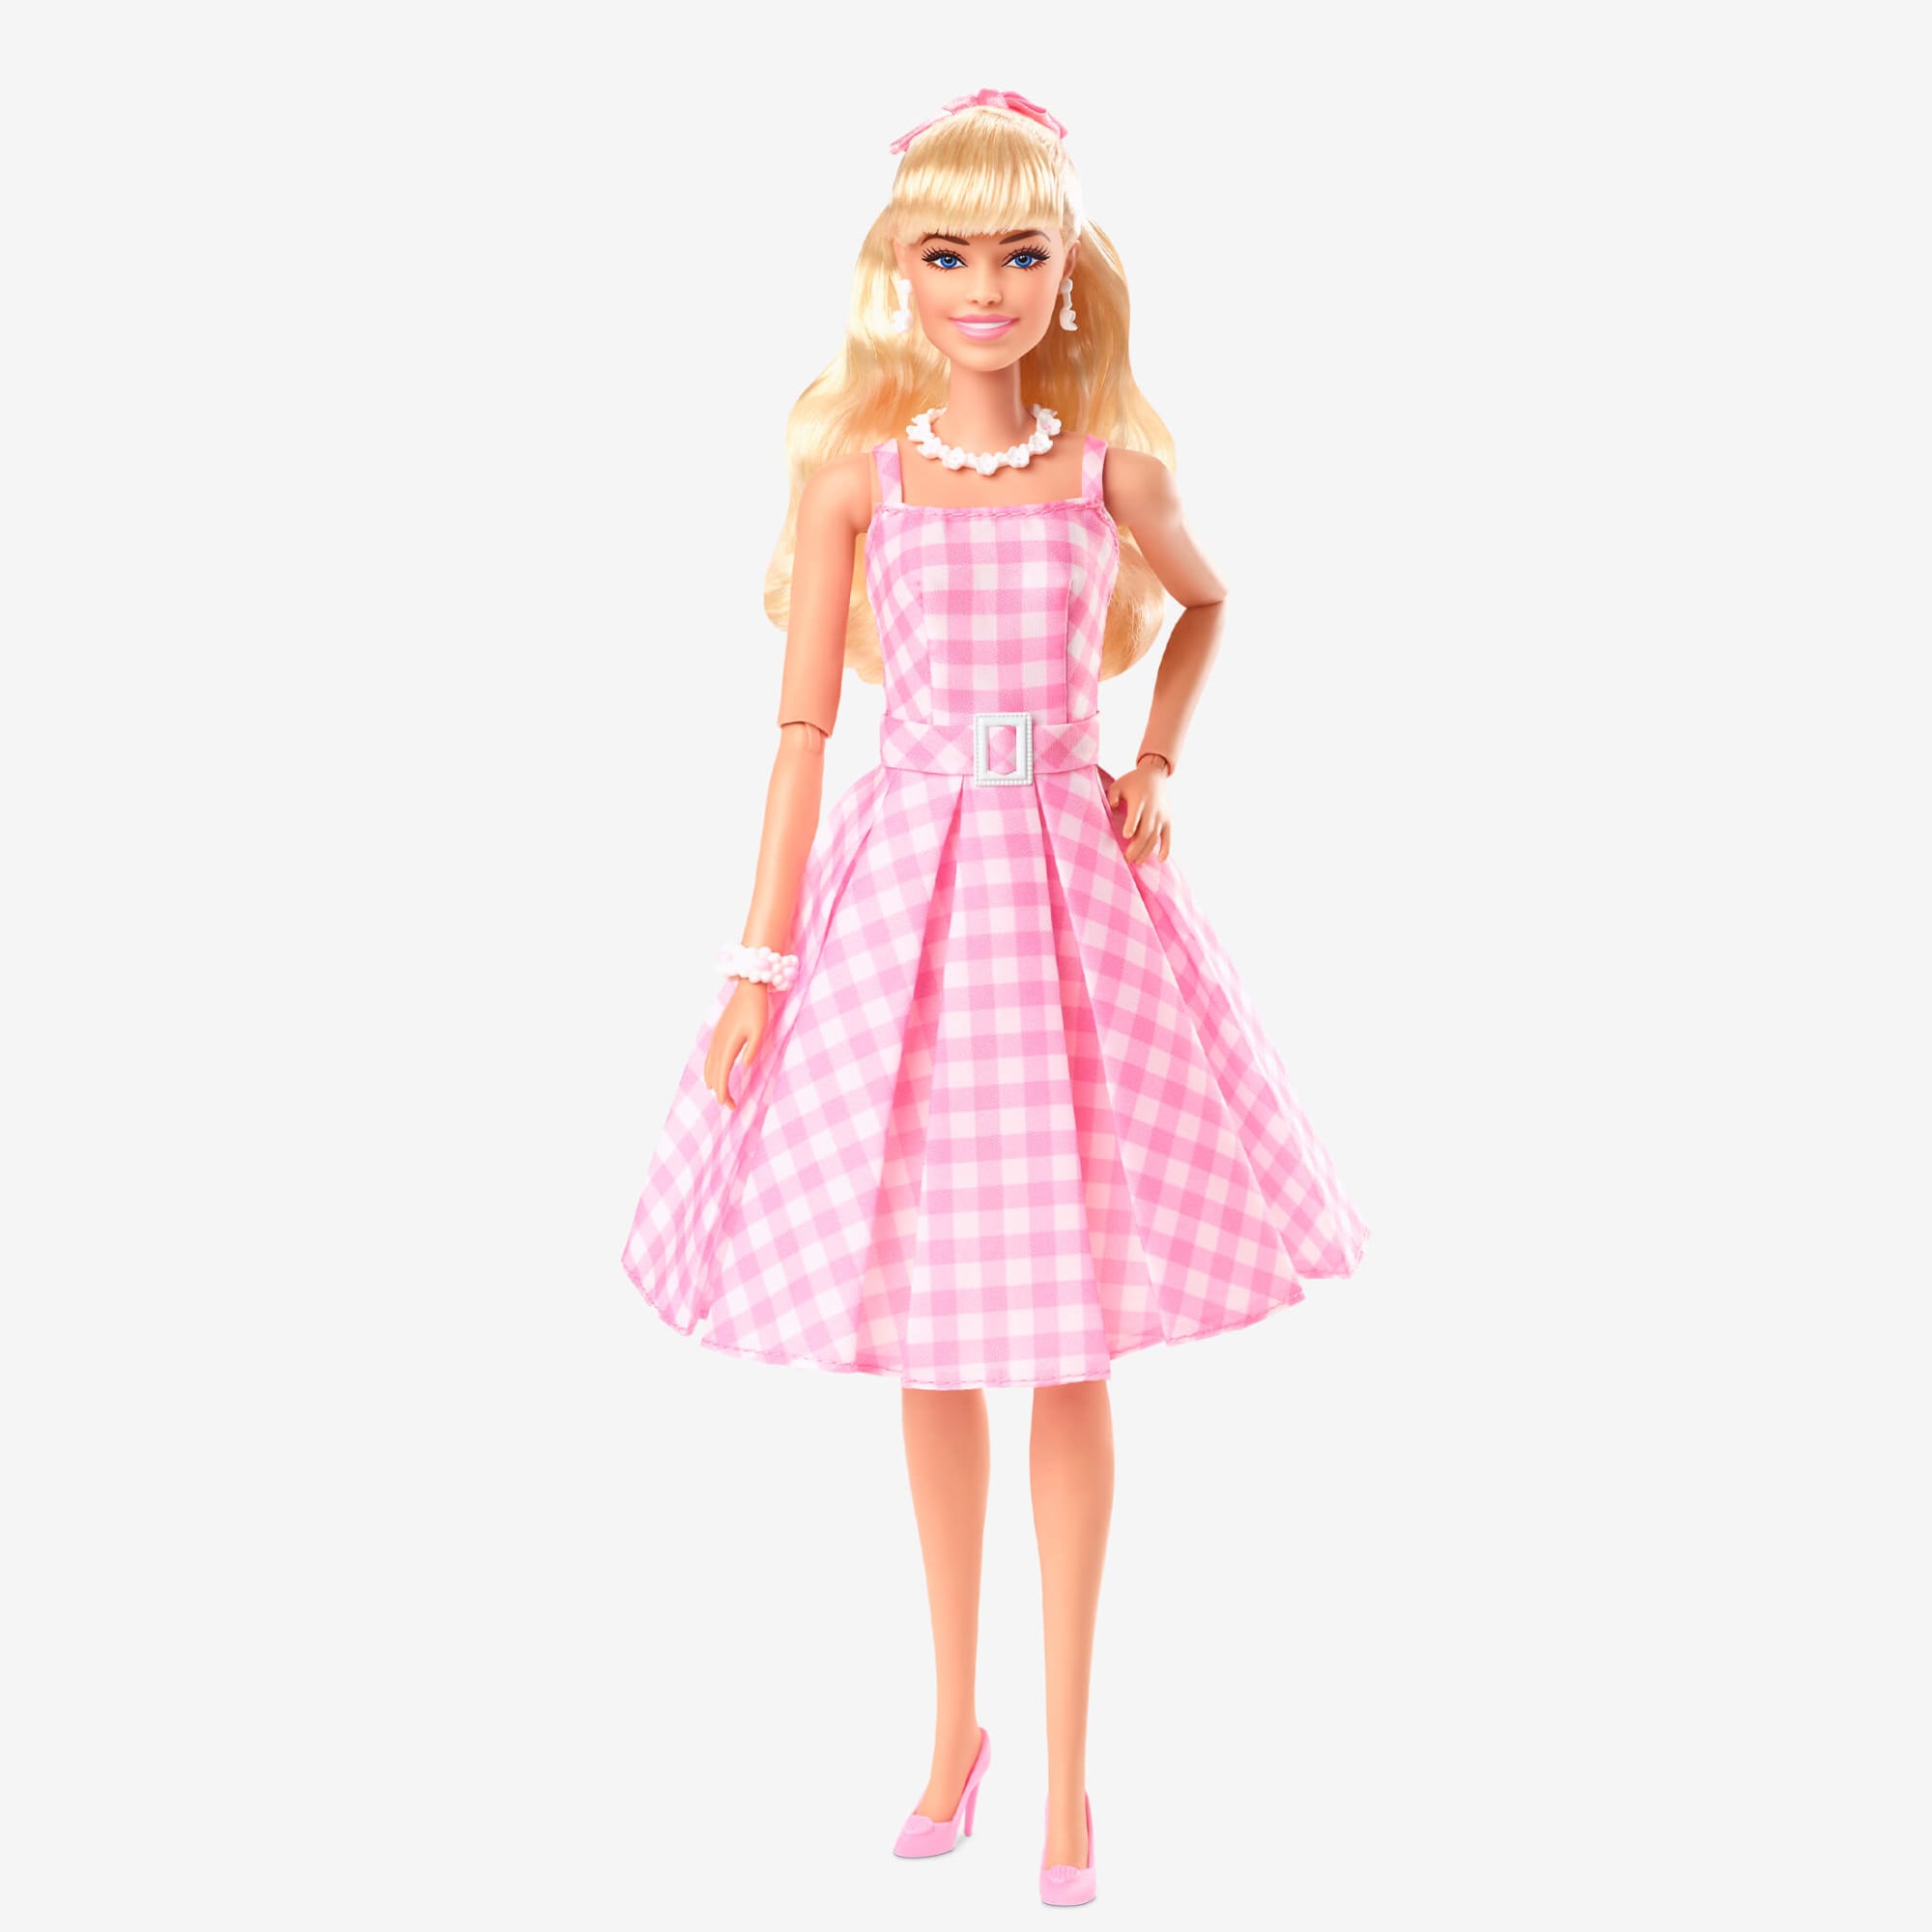 Orlands Barbie Dolls Toy Beautiful Multicolor Simulation Barbie Dolls with  Dress,Dolls Gifts for Kids Girls Toddlers (Orange) : Amazon.in: Toys & Games